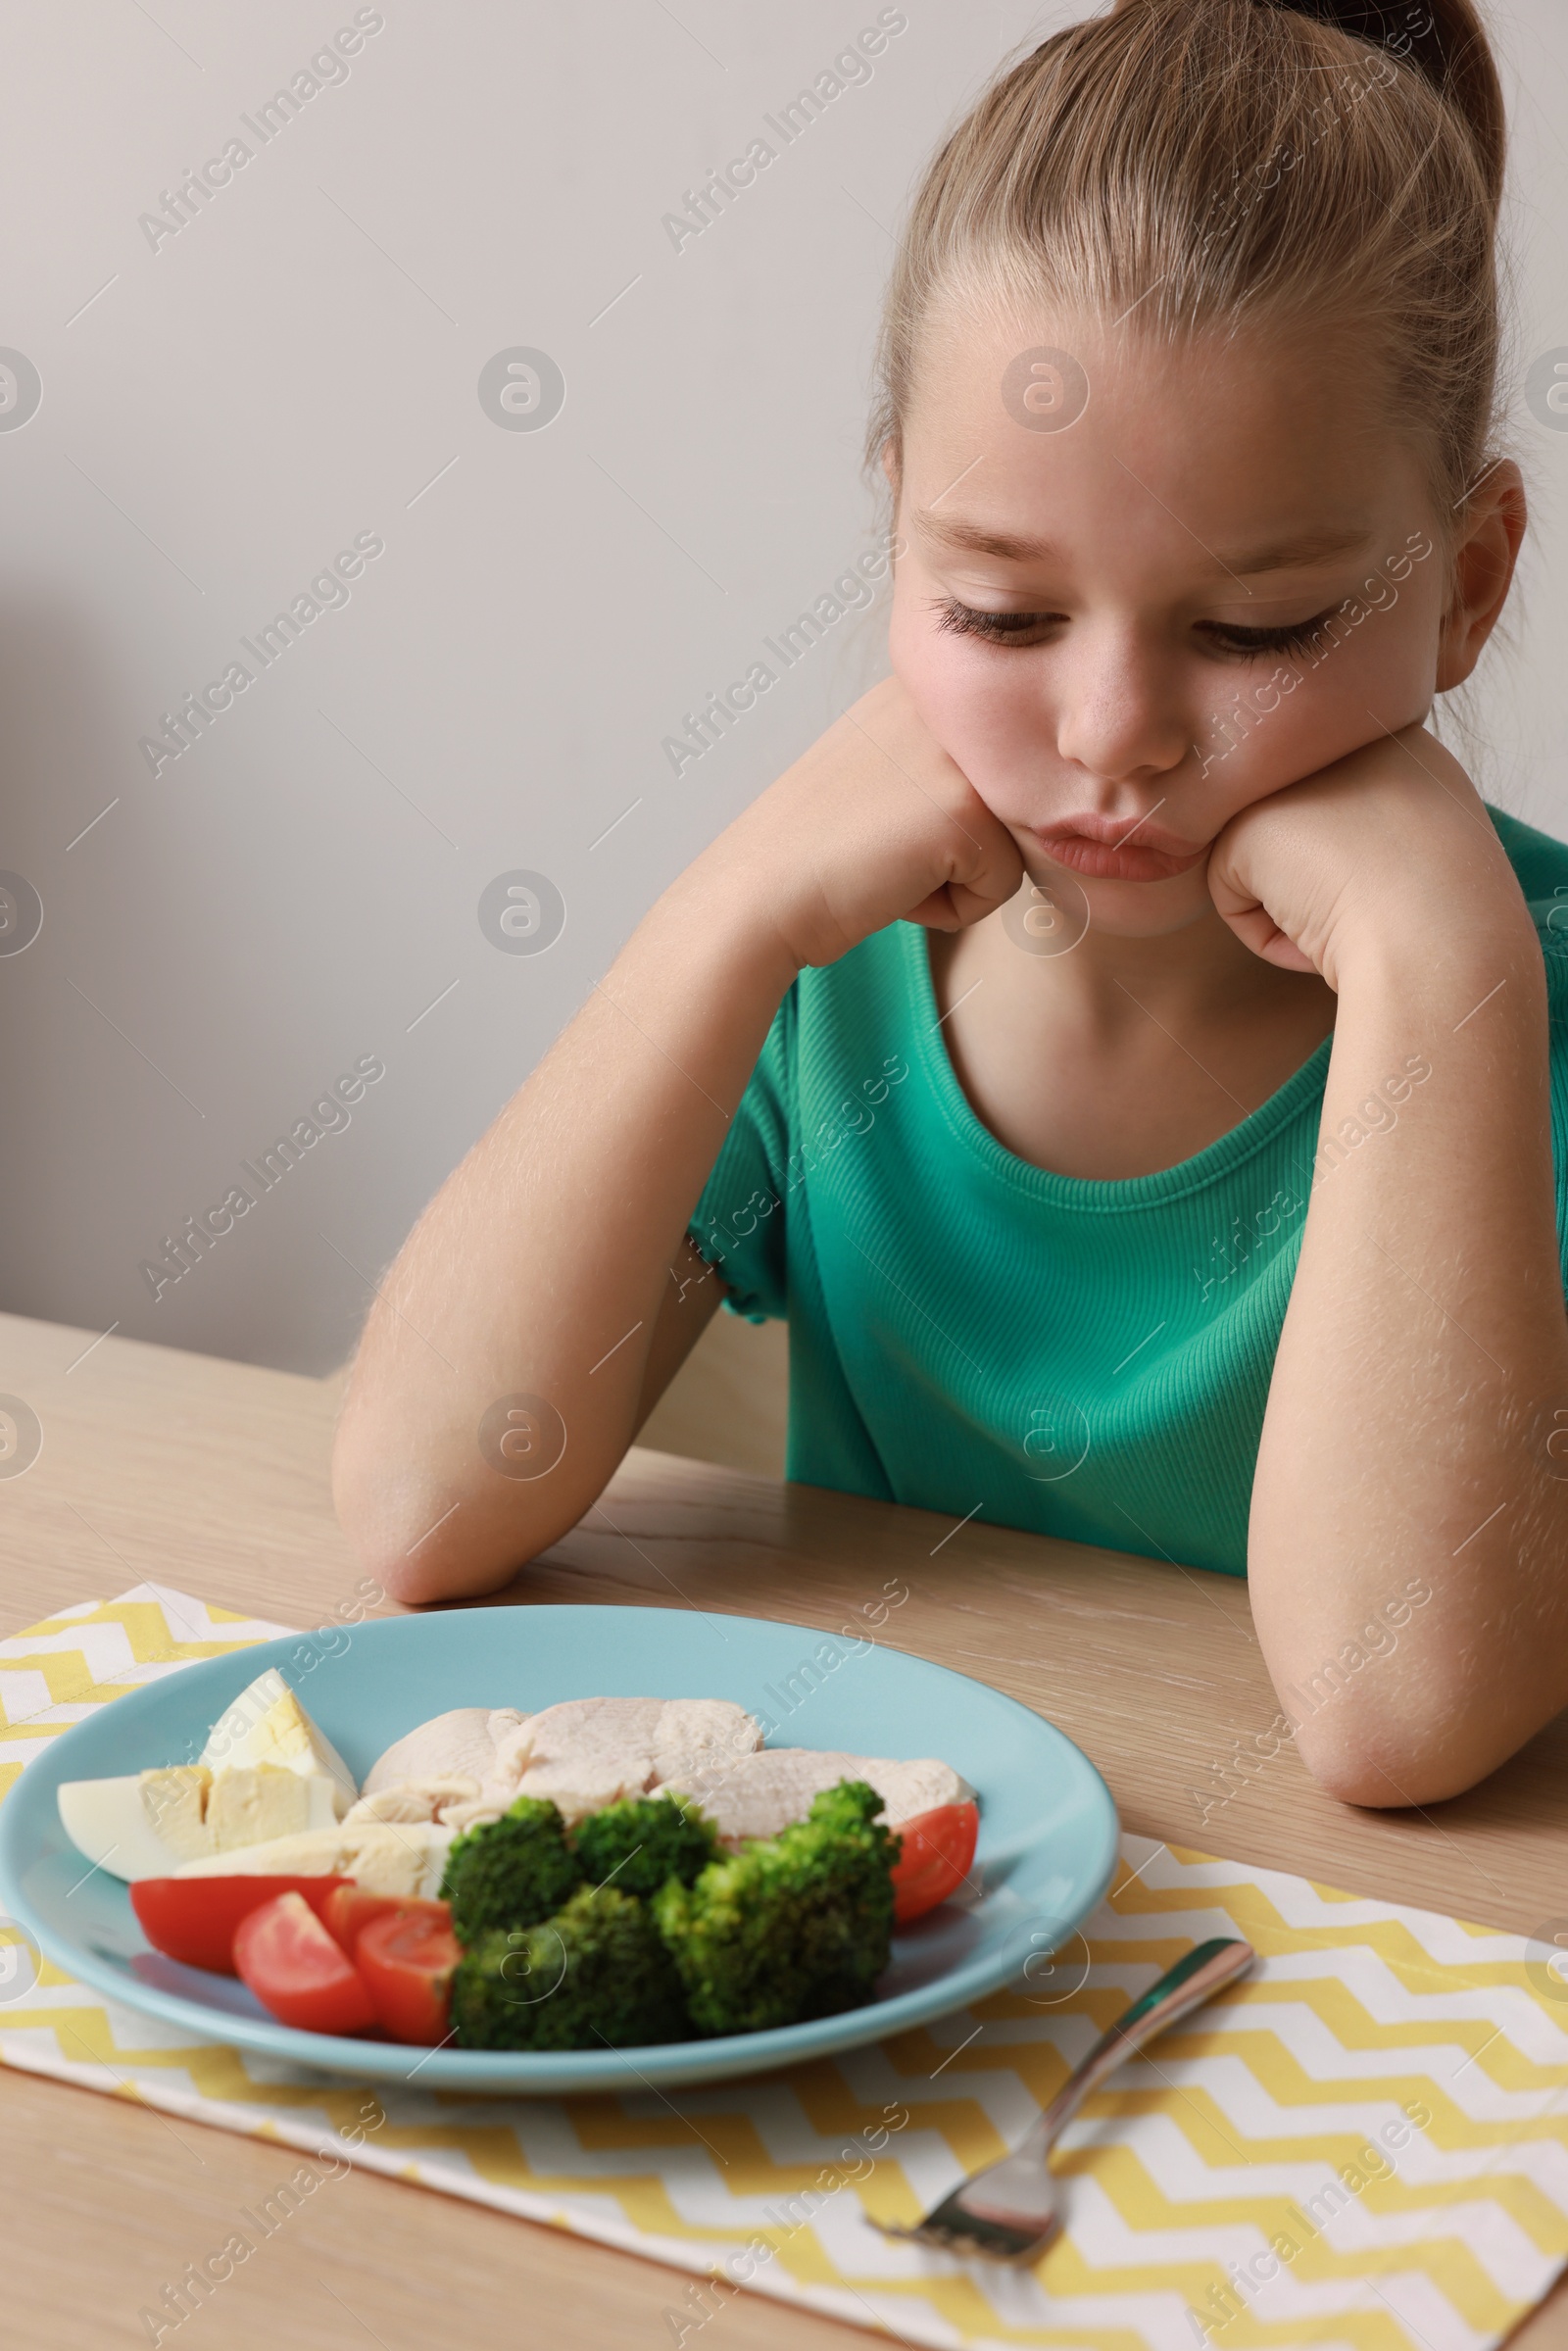 Photo of Cute little girl refusing to eat her breakfast at table on grey background